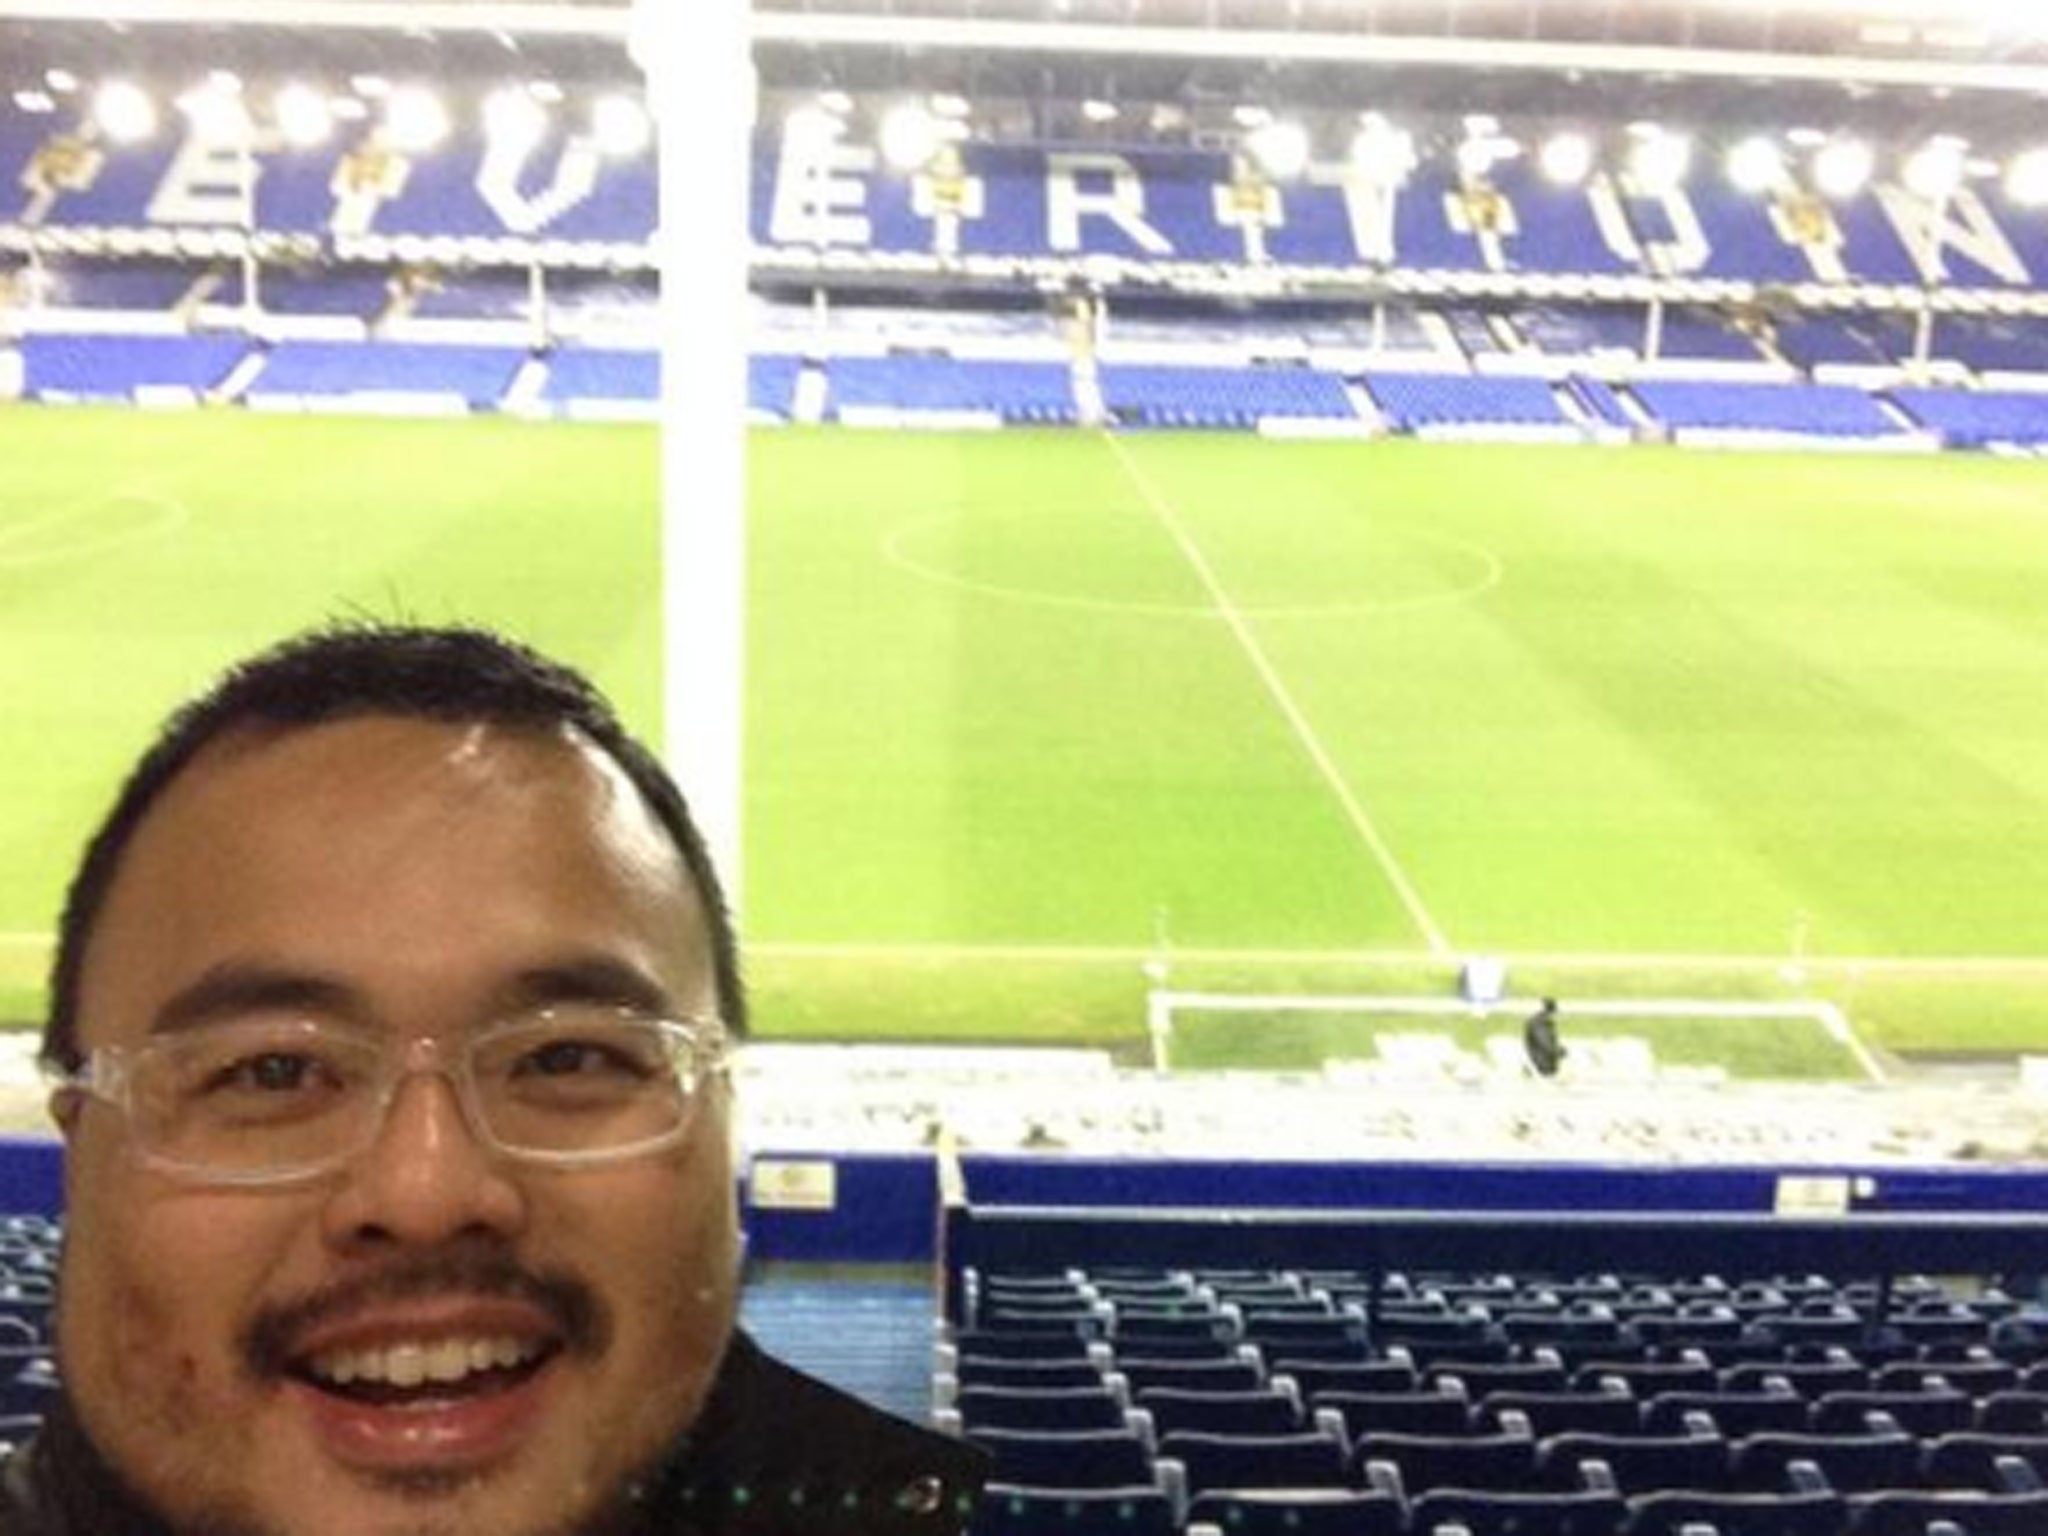 Ric Wee pictured before the game was postponed